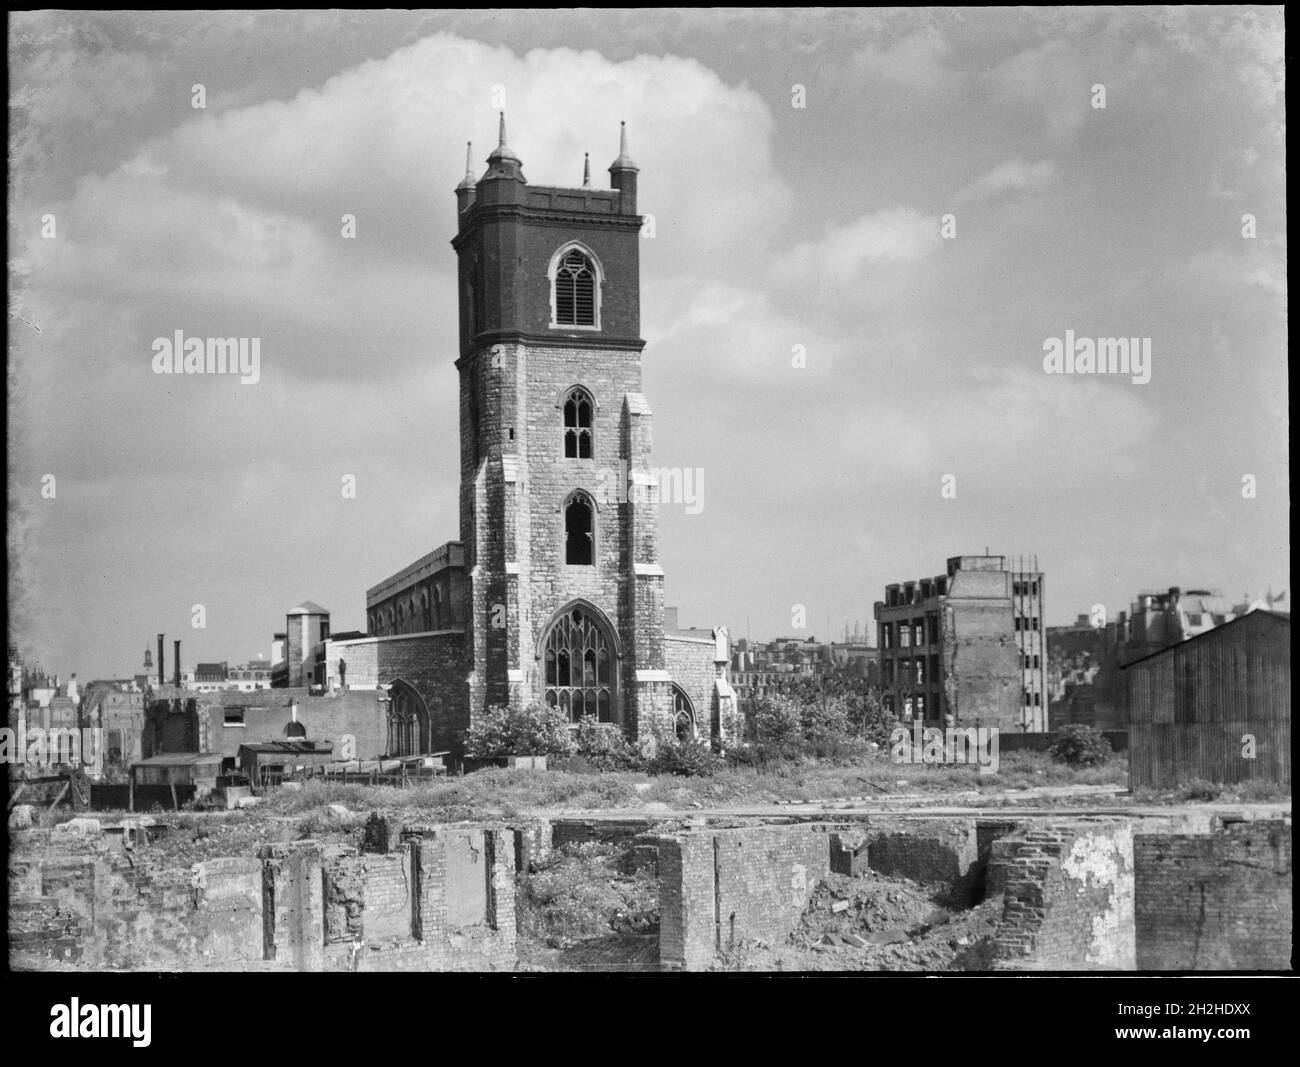 St Giles' Cripplegate, Fore Street, City and County of the City of London, Greater London Authority, 1941-1945. A view looking south-east across a bomb damaged landscape towards St Giles' Cripplegate Church. St Giles' Church was badly damaged during the Blitz in 1941 and the immediate area around it was almost completely destroyed by bombing. The church was rebuilt in the 1950s and now stands at the centre of the Barbican Estate. Stock Photo